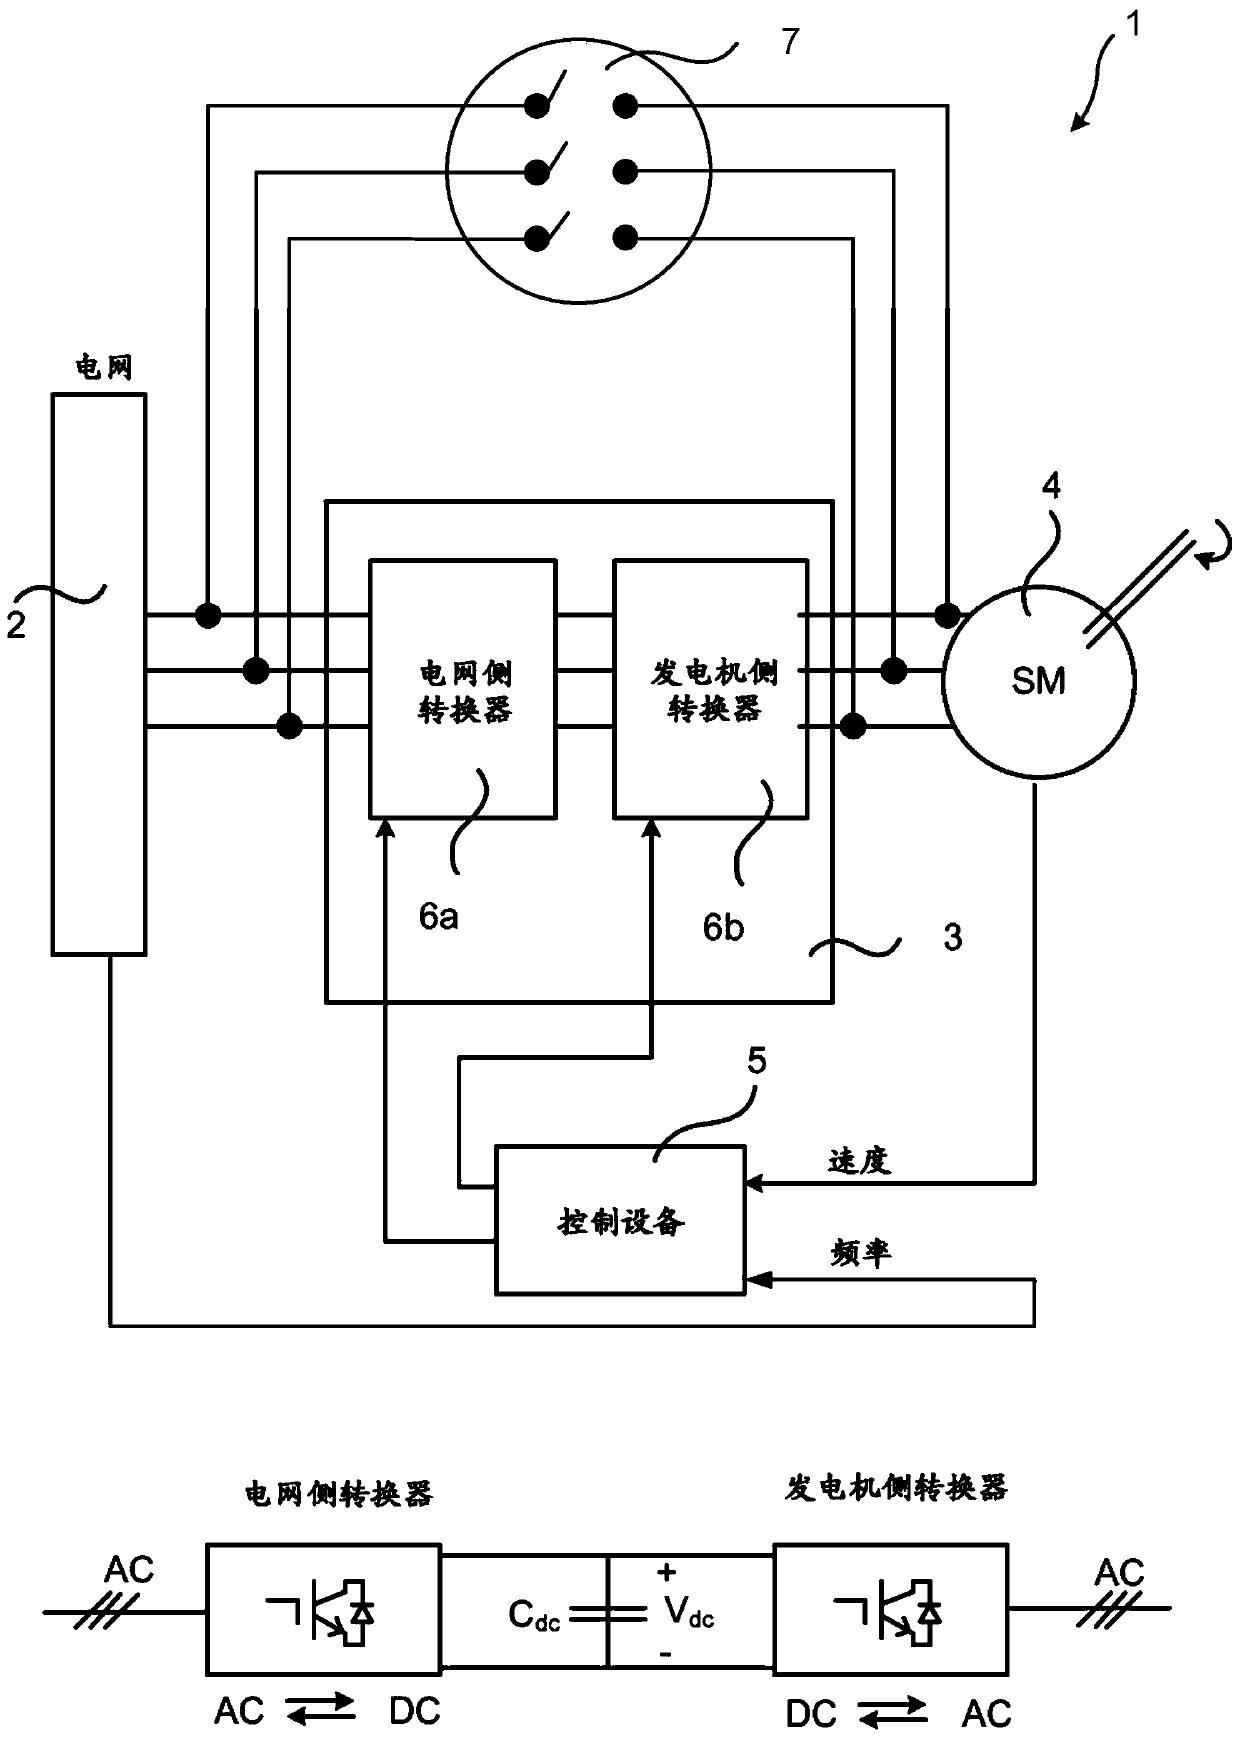 A method of providing power support to an electrical power grid